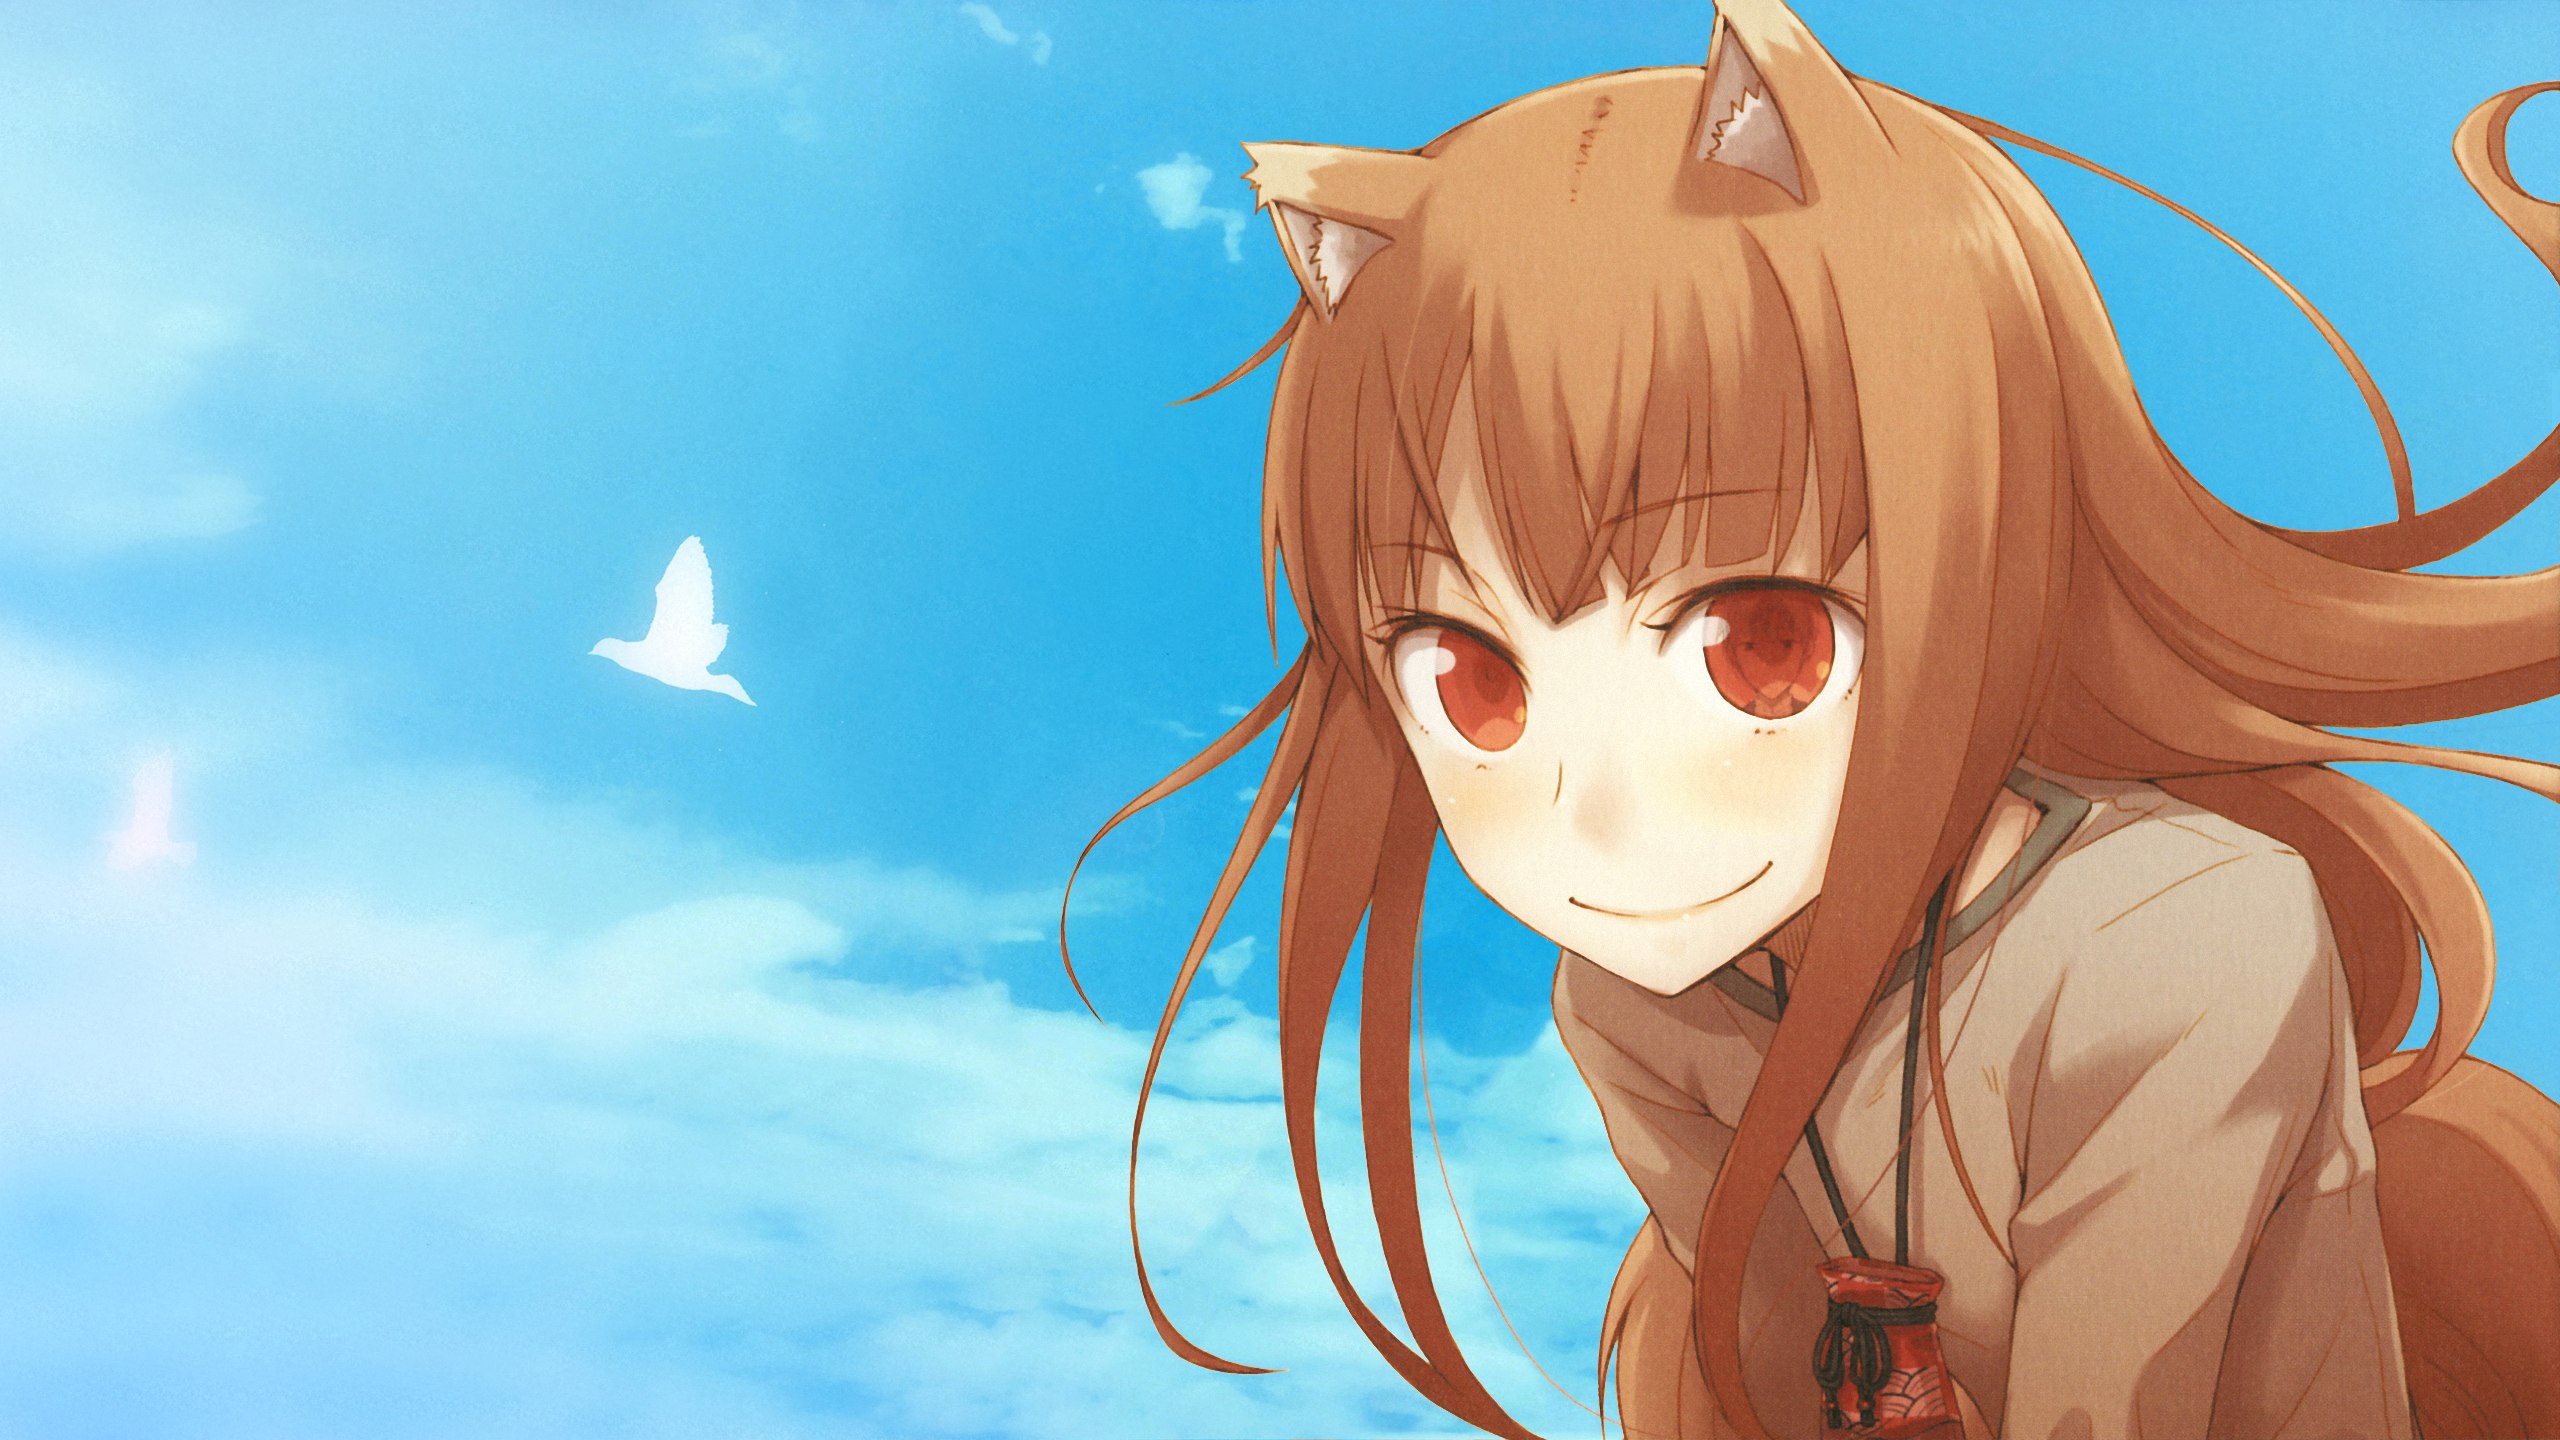 Spice And Wolf Backgrounds, Compatible - PC, Mobile, Gadgets| 2560x1440 px